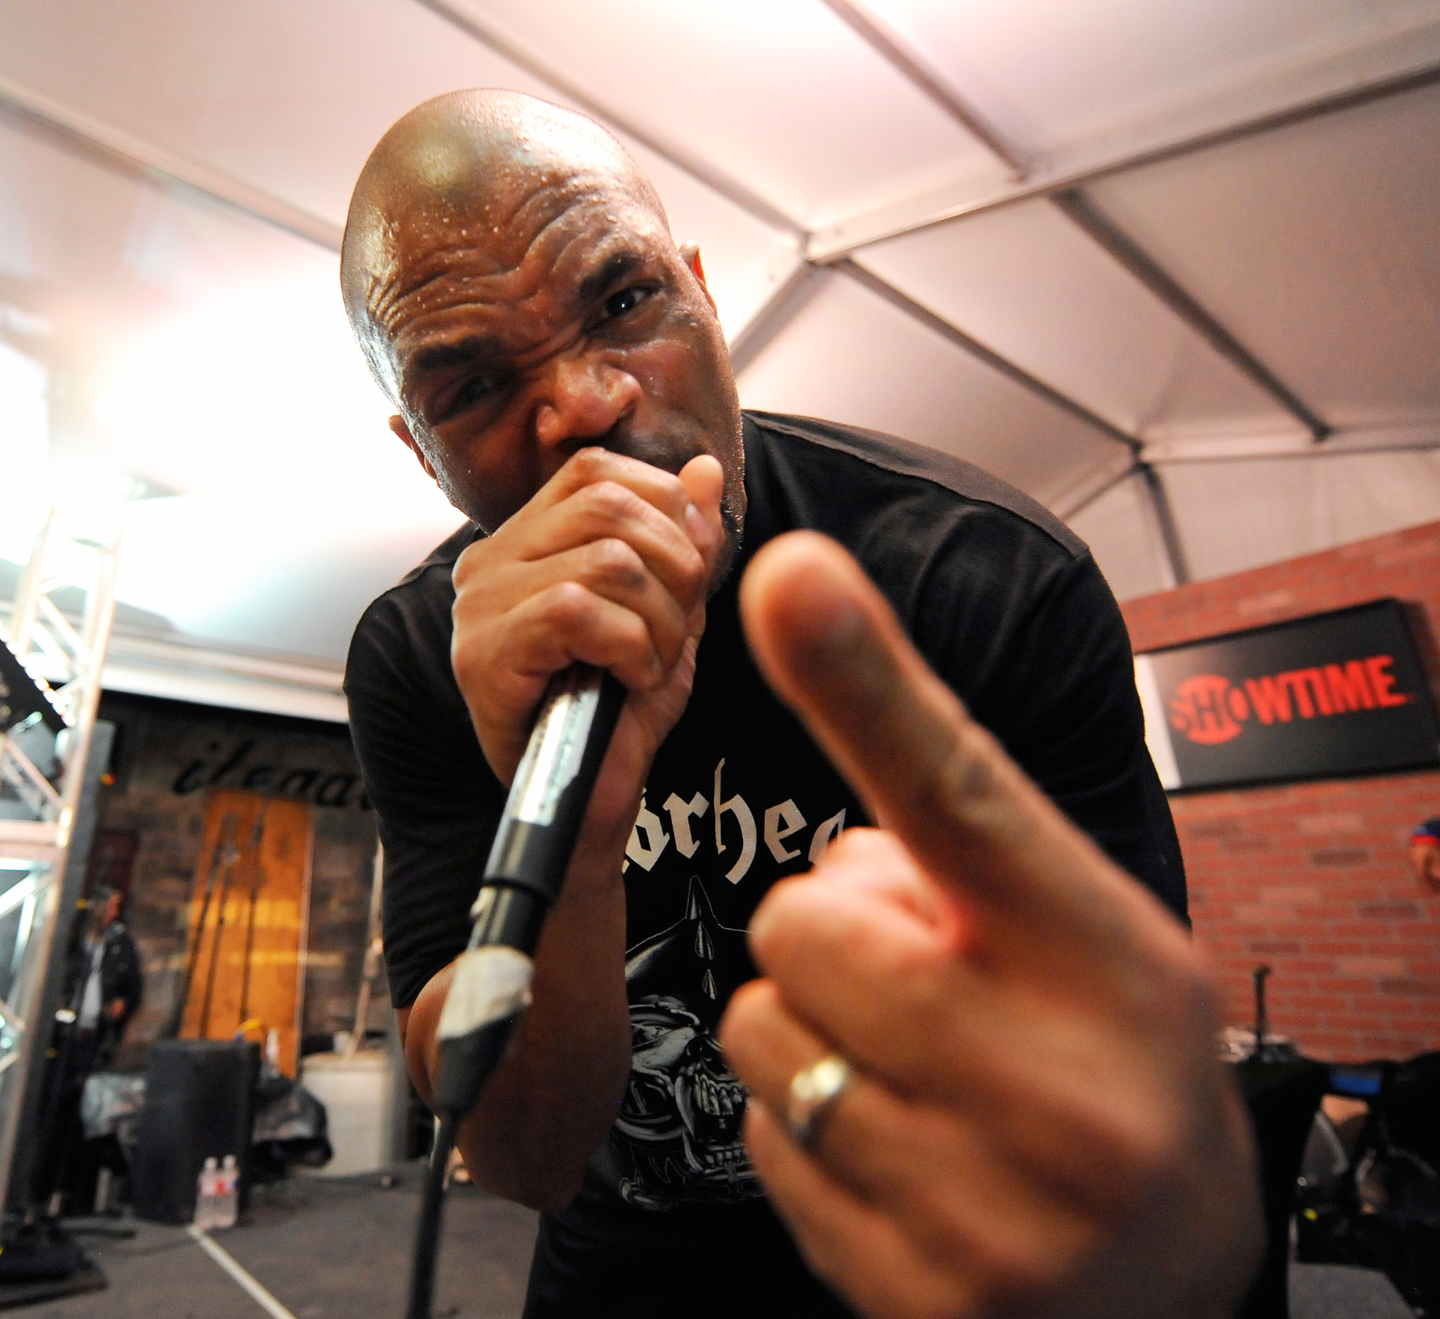 DMC was at The Showtime House at Clive Bar. Photo by Nicola Gell/Getty Images for SXSW